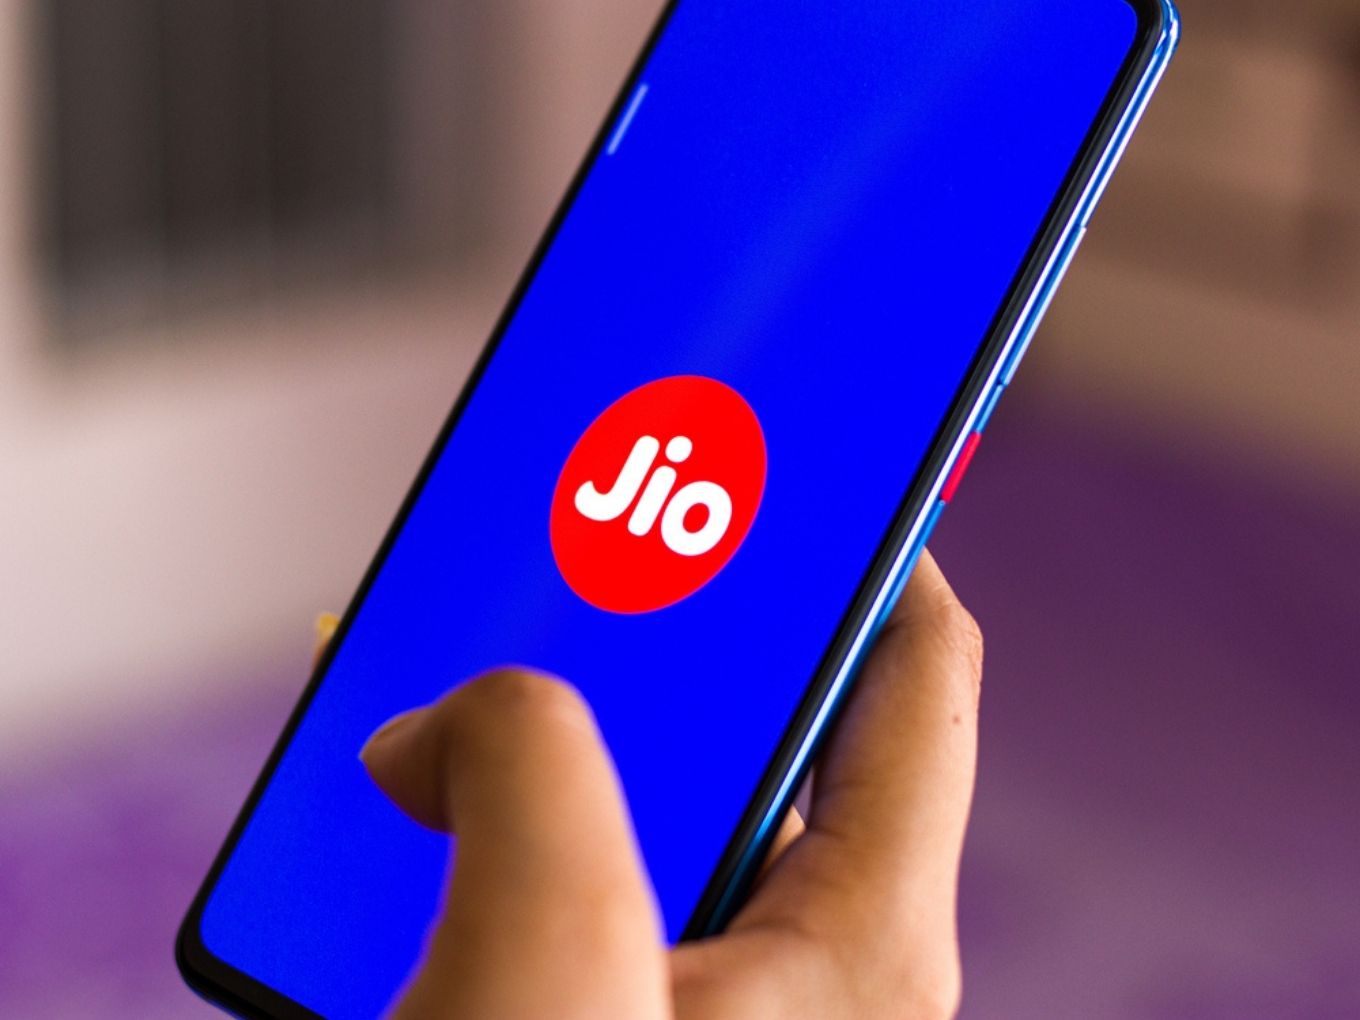 Reliance Jio Teams Up With Samsung For IoT Services To Back 5G Launch